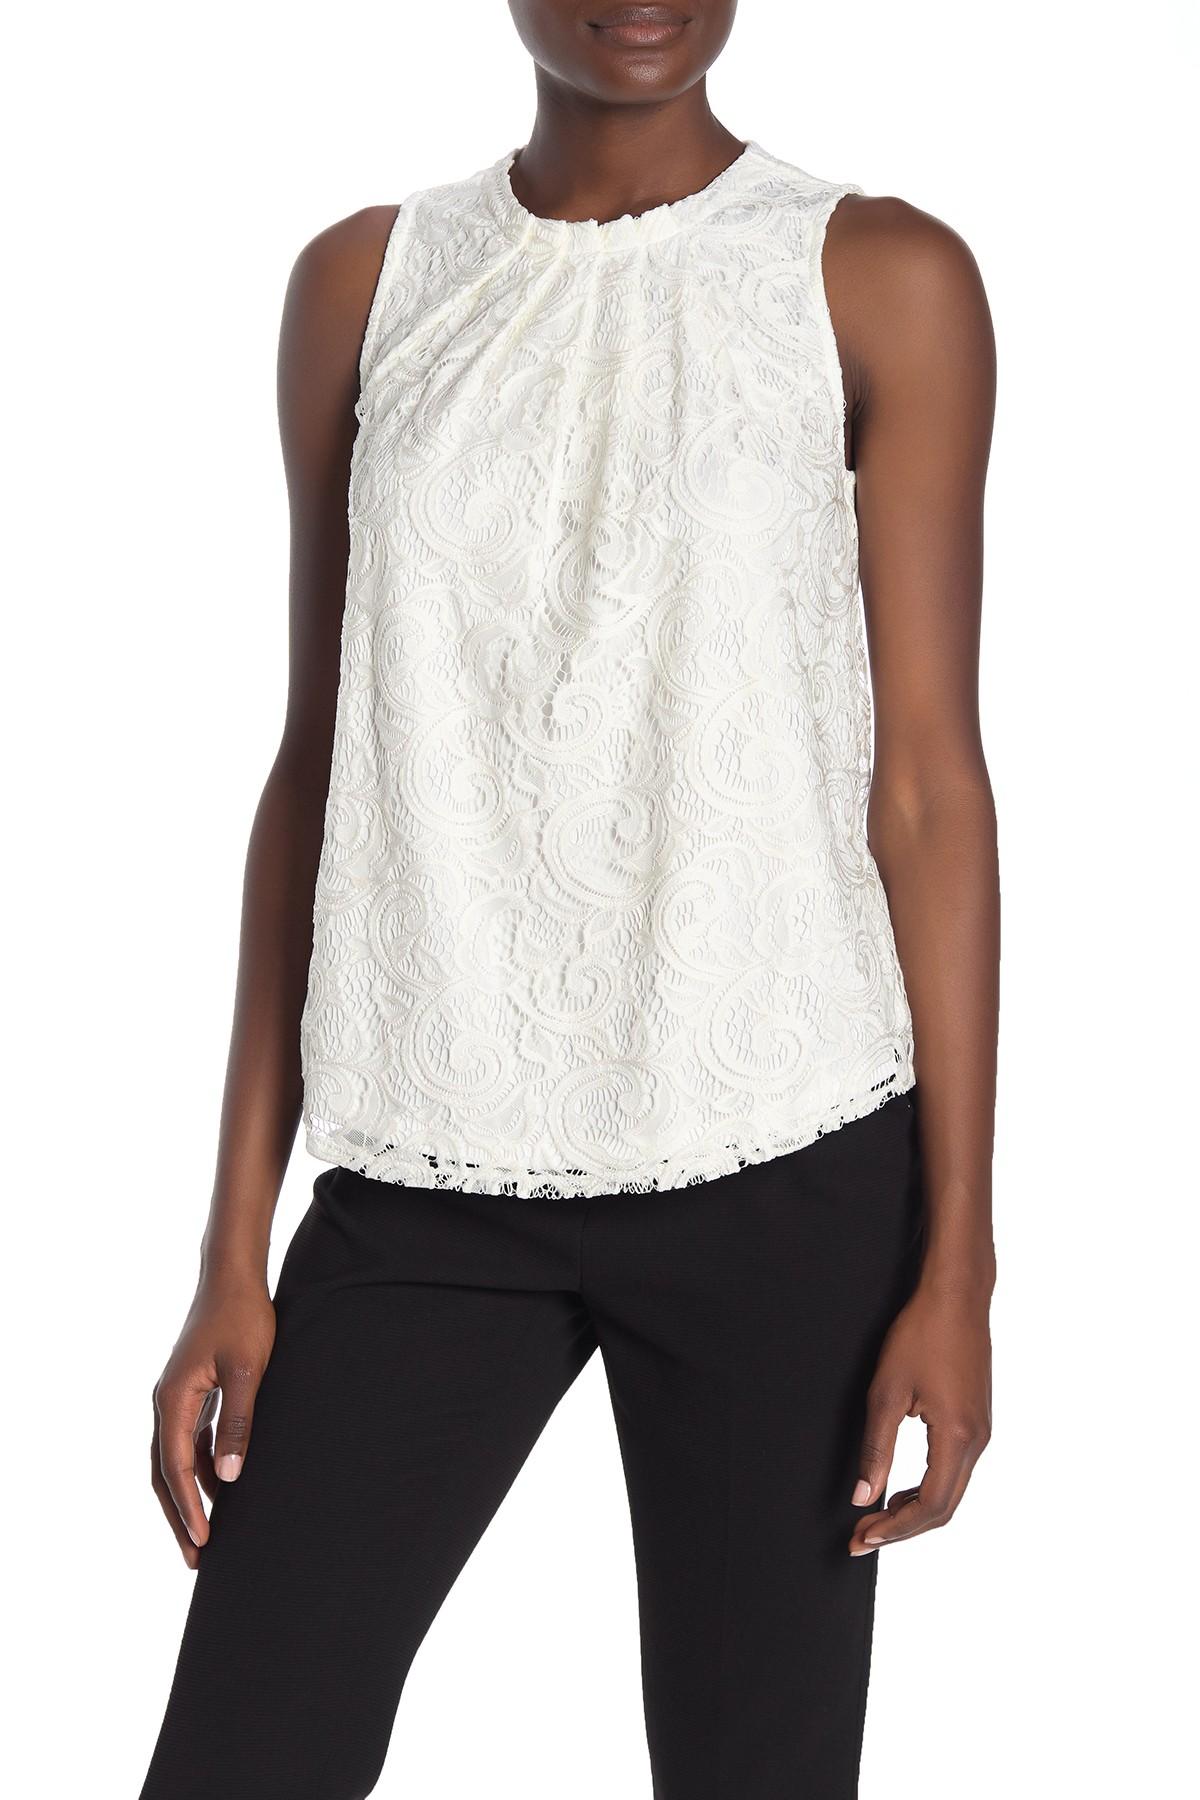 Lyst - Adrianna Papell Sleeveless Knit Lace Top in Natural